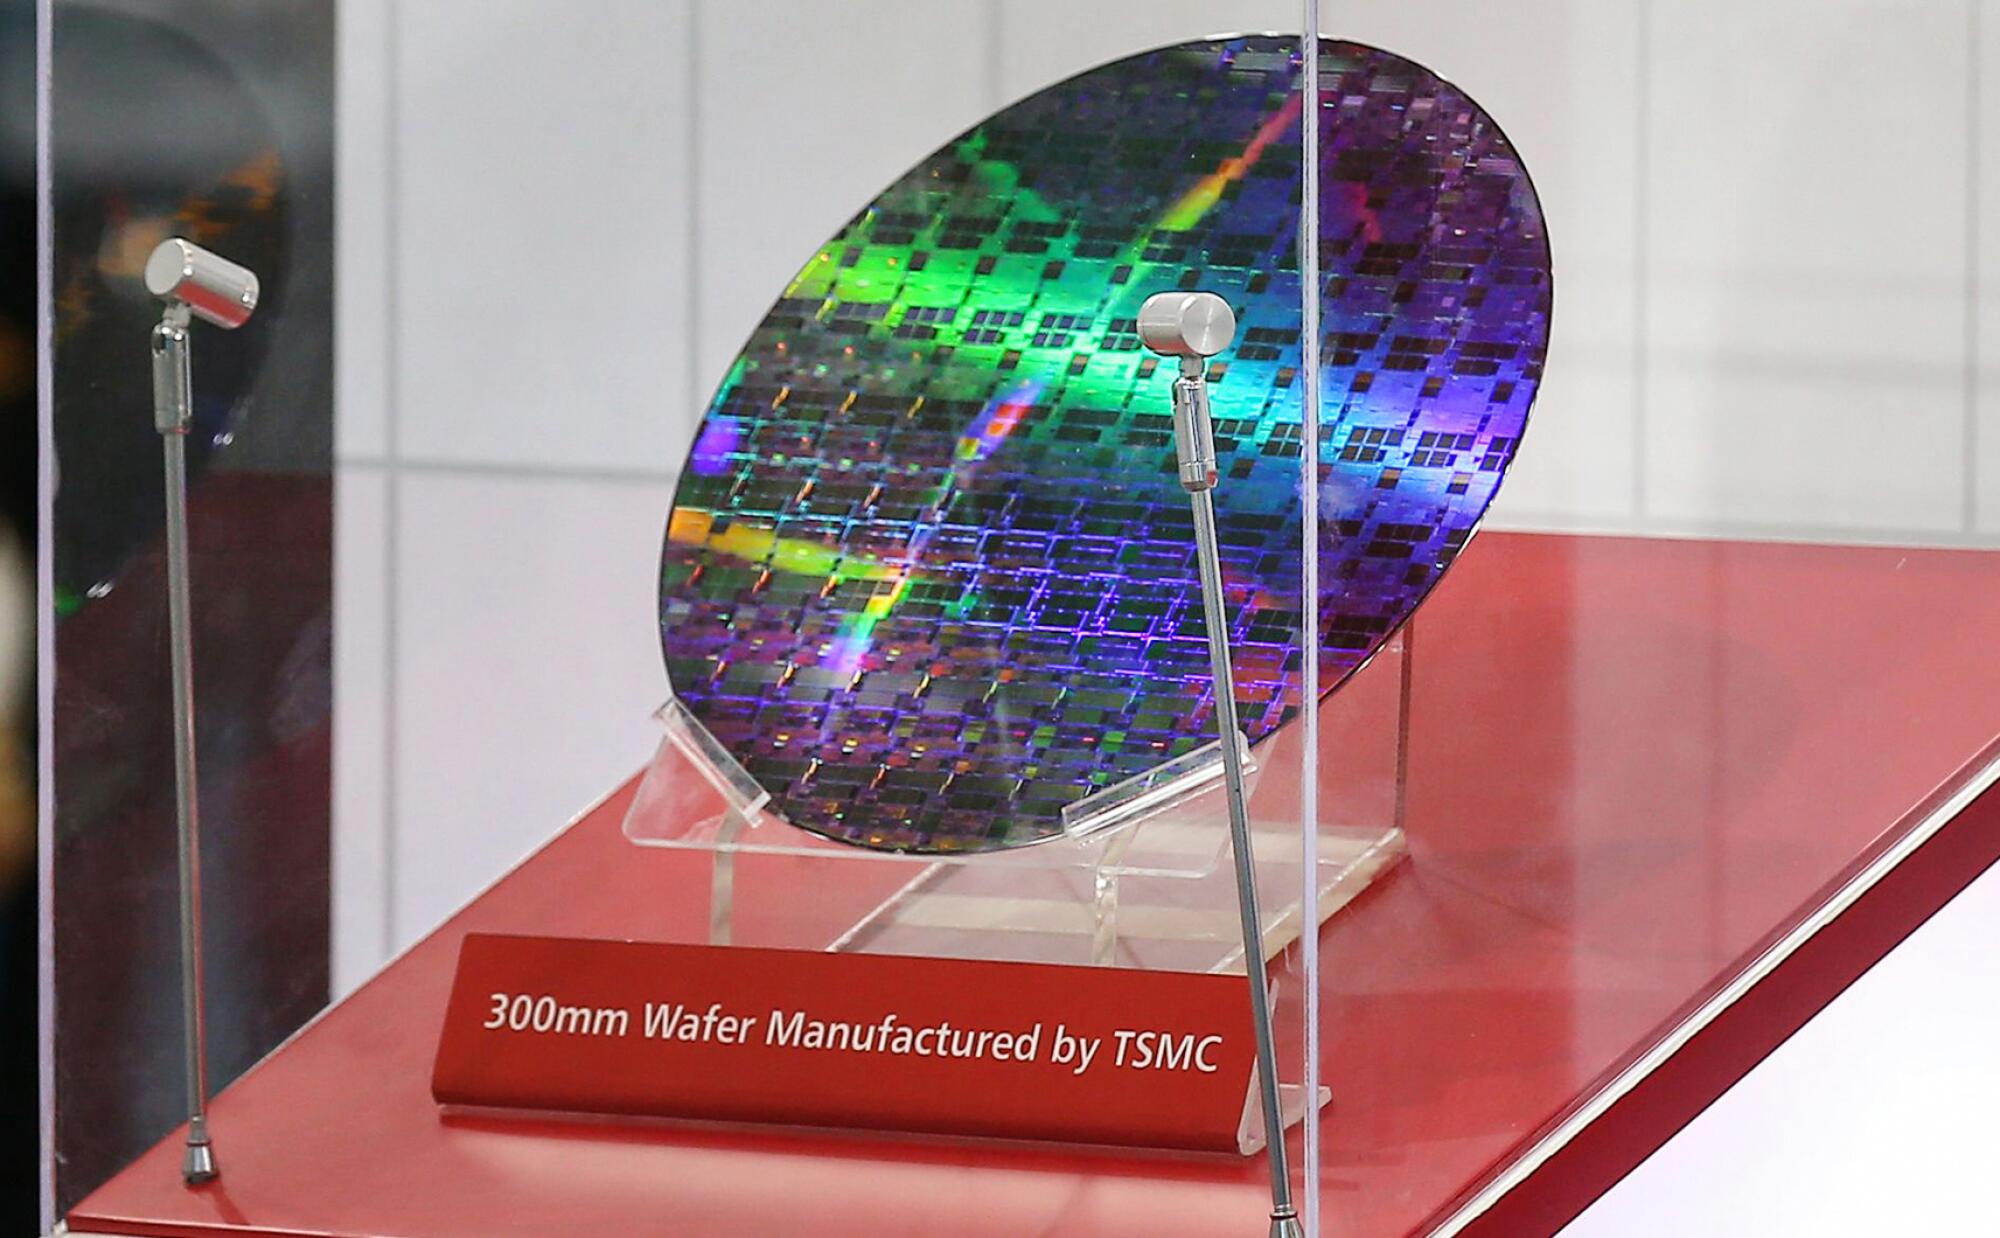 A reflective, circular semiconductor chip on display with a sign that says 300mm Wafer Manufactured by TSMC